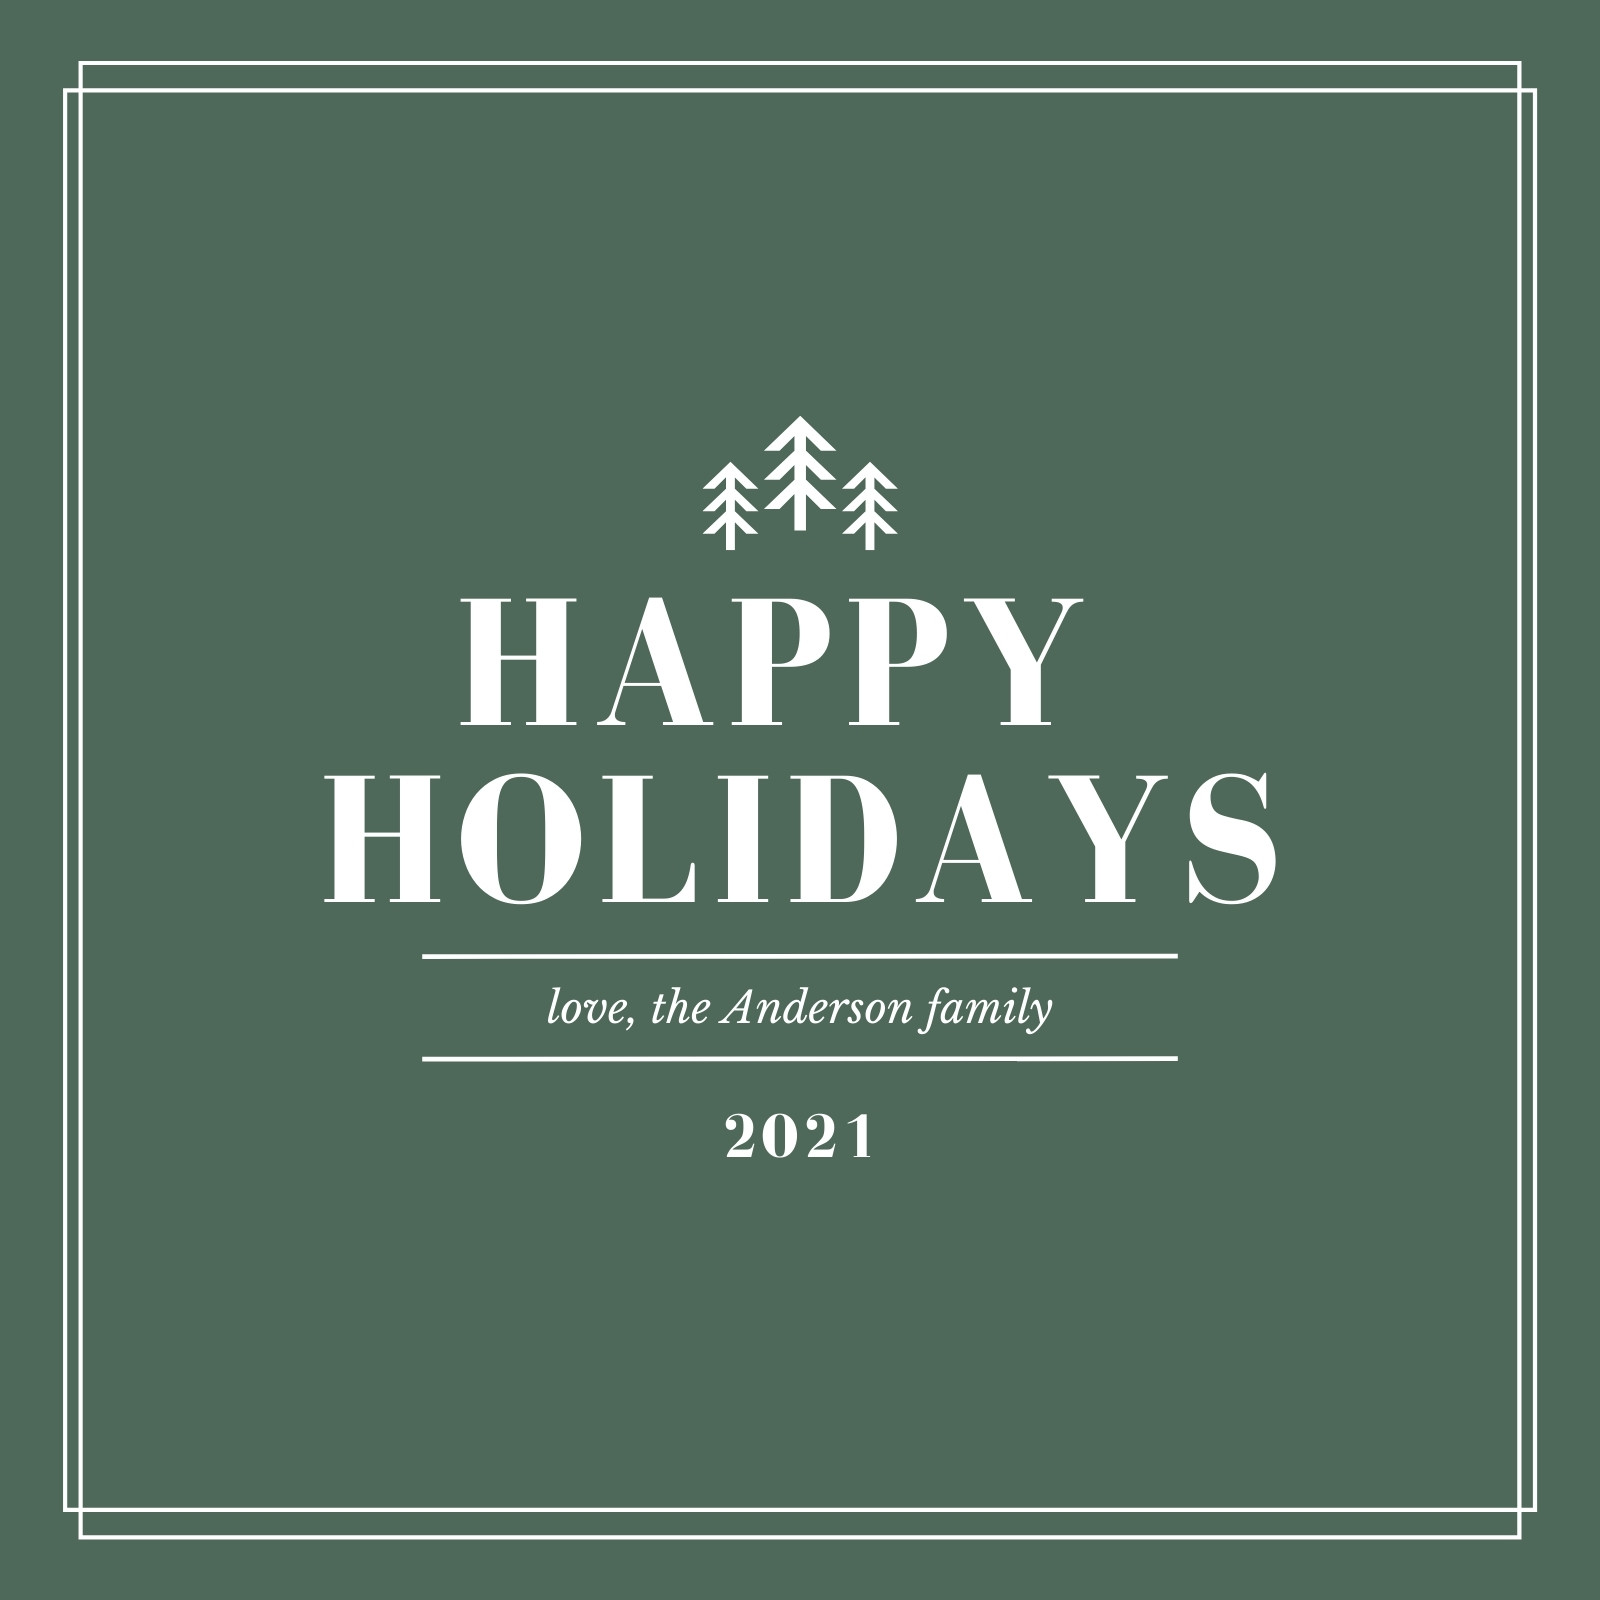 happy holidays images 2022